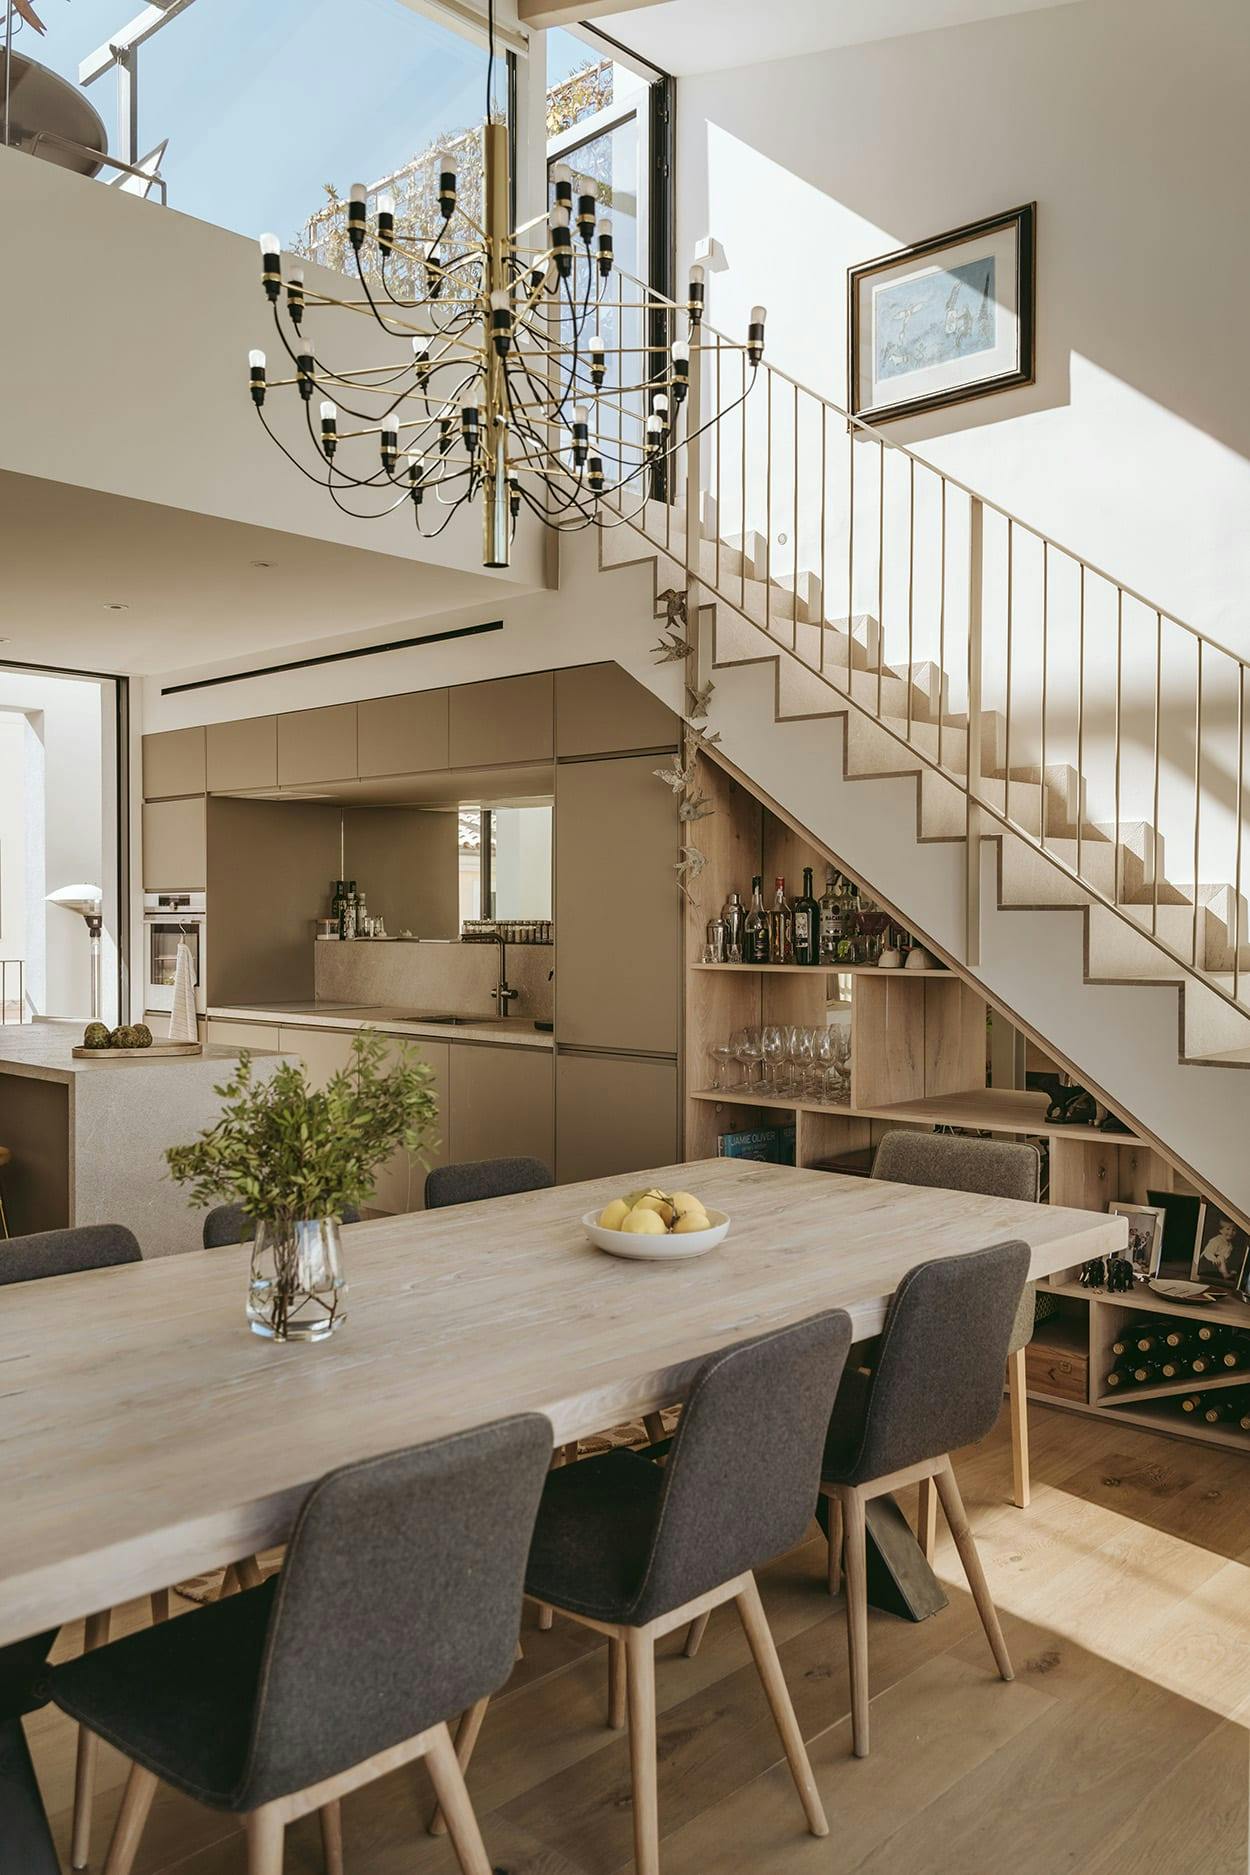 The image features a large, modern kitchen with a wooden dining table and chairs, a chandelier, and a staircase.